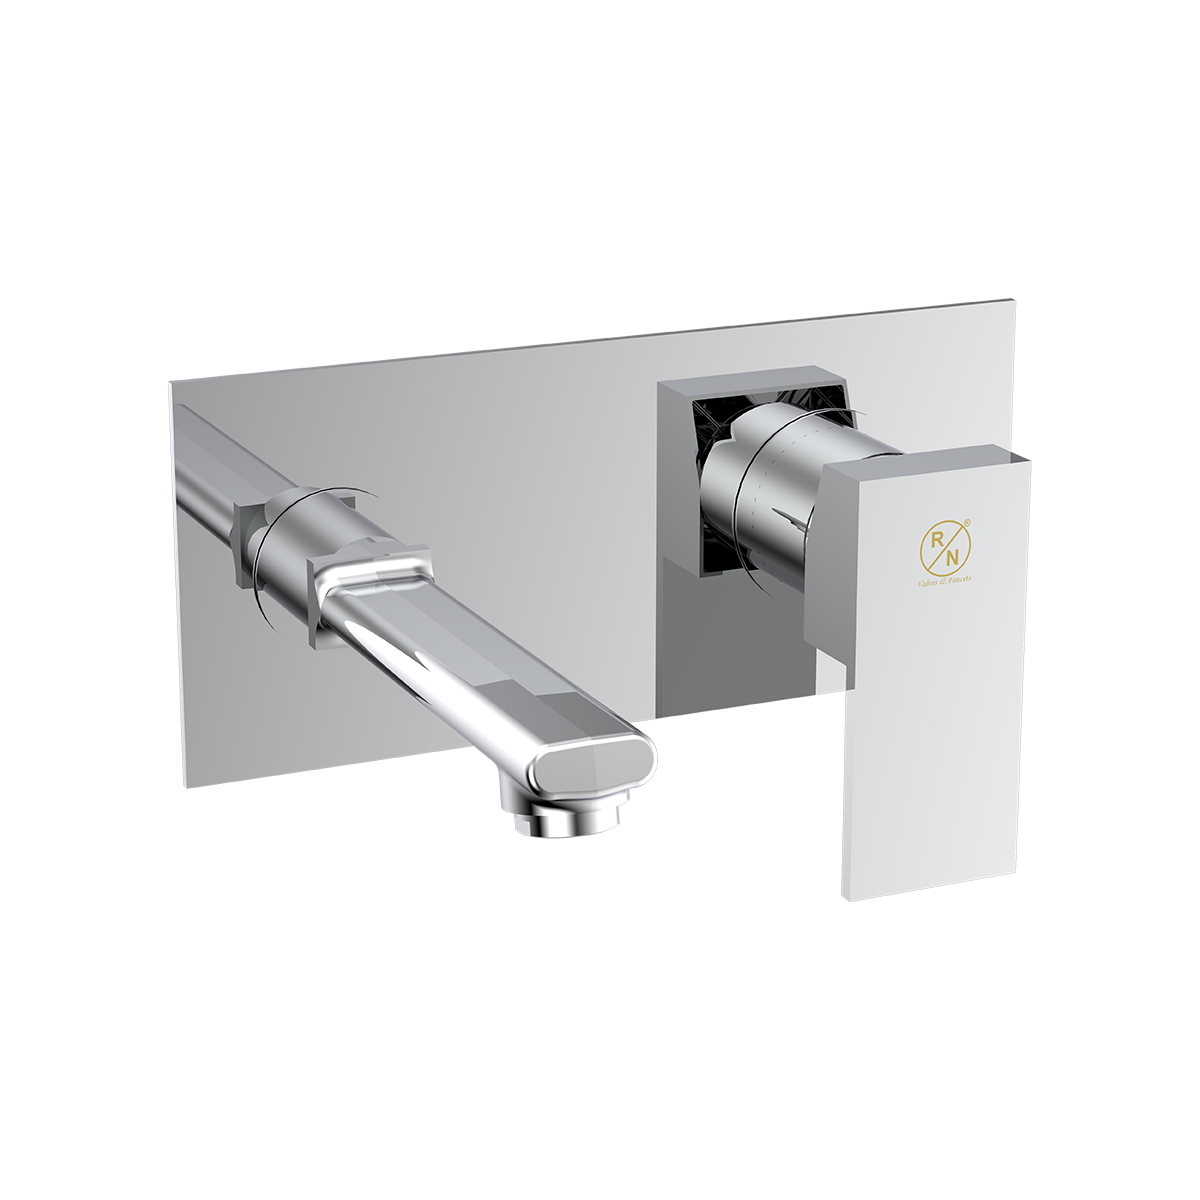 Single Lever Expose Part Kit Of Wall Mounted Basin Mixer(Consisting Of Operating Lever,Wall Flange & Spout Only)